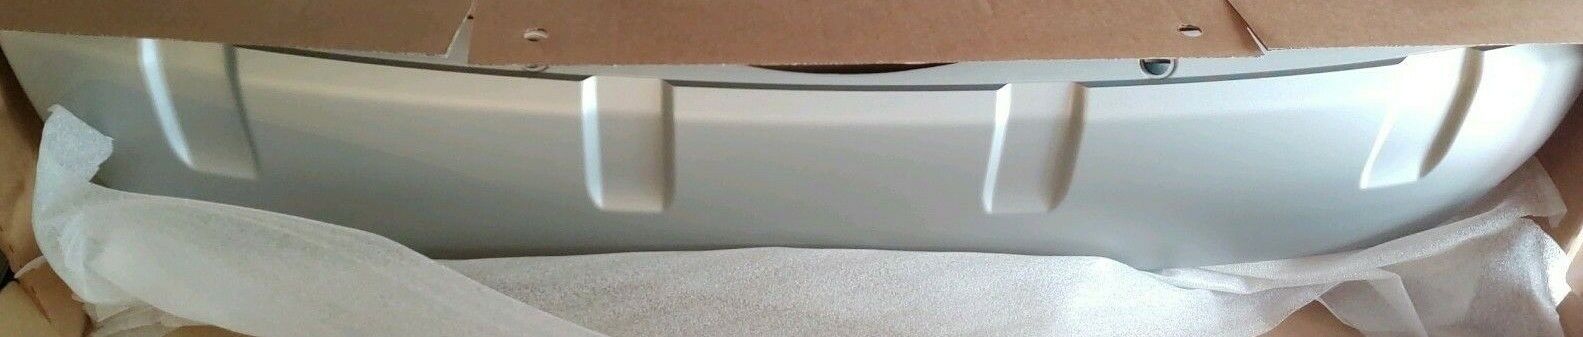 Land Rover Discovery 5 OEM L462 2017+ White Silver Rear Lower Bumper Trim New